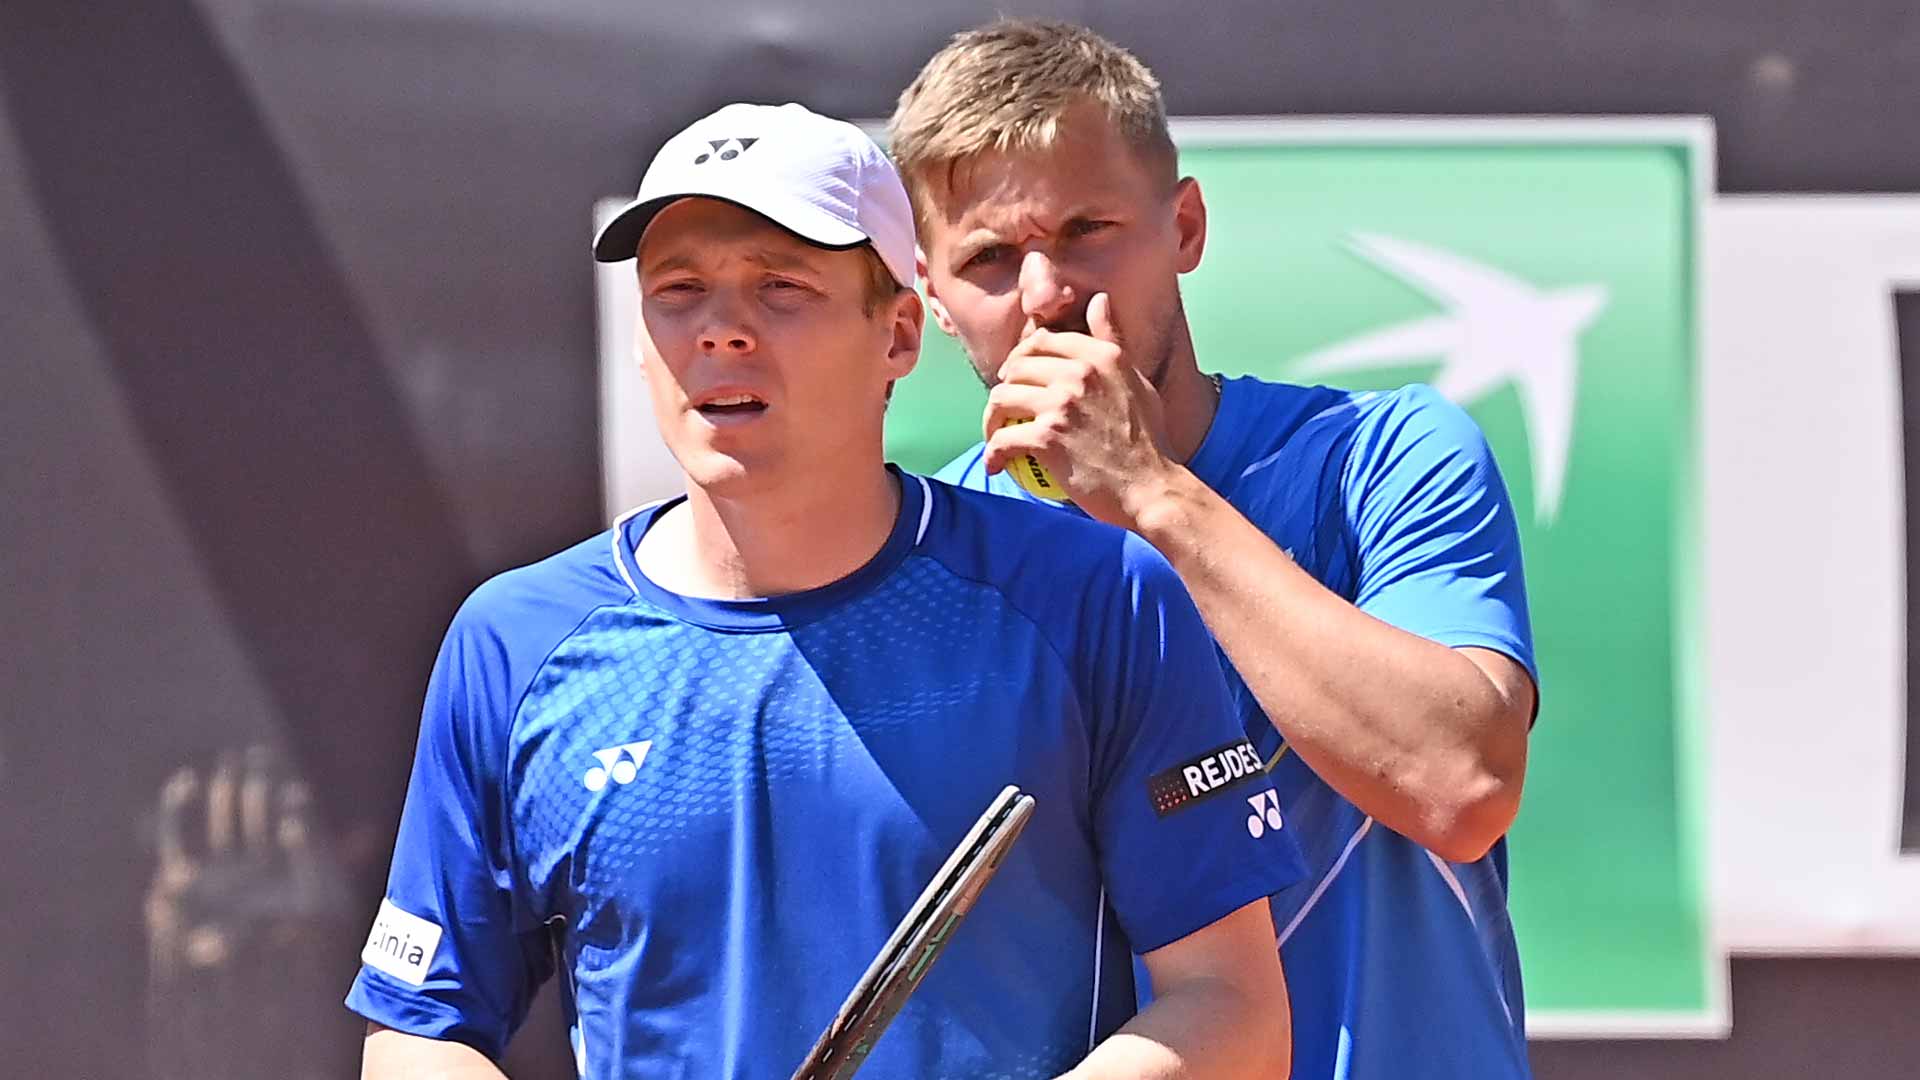 Harri Heliovaara and Lloyd Glasspool confer during their second-round doubles win on Thursday in Rome against Thanasi Kokkinakis and Frances Tiafoe.